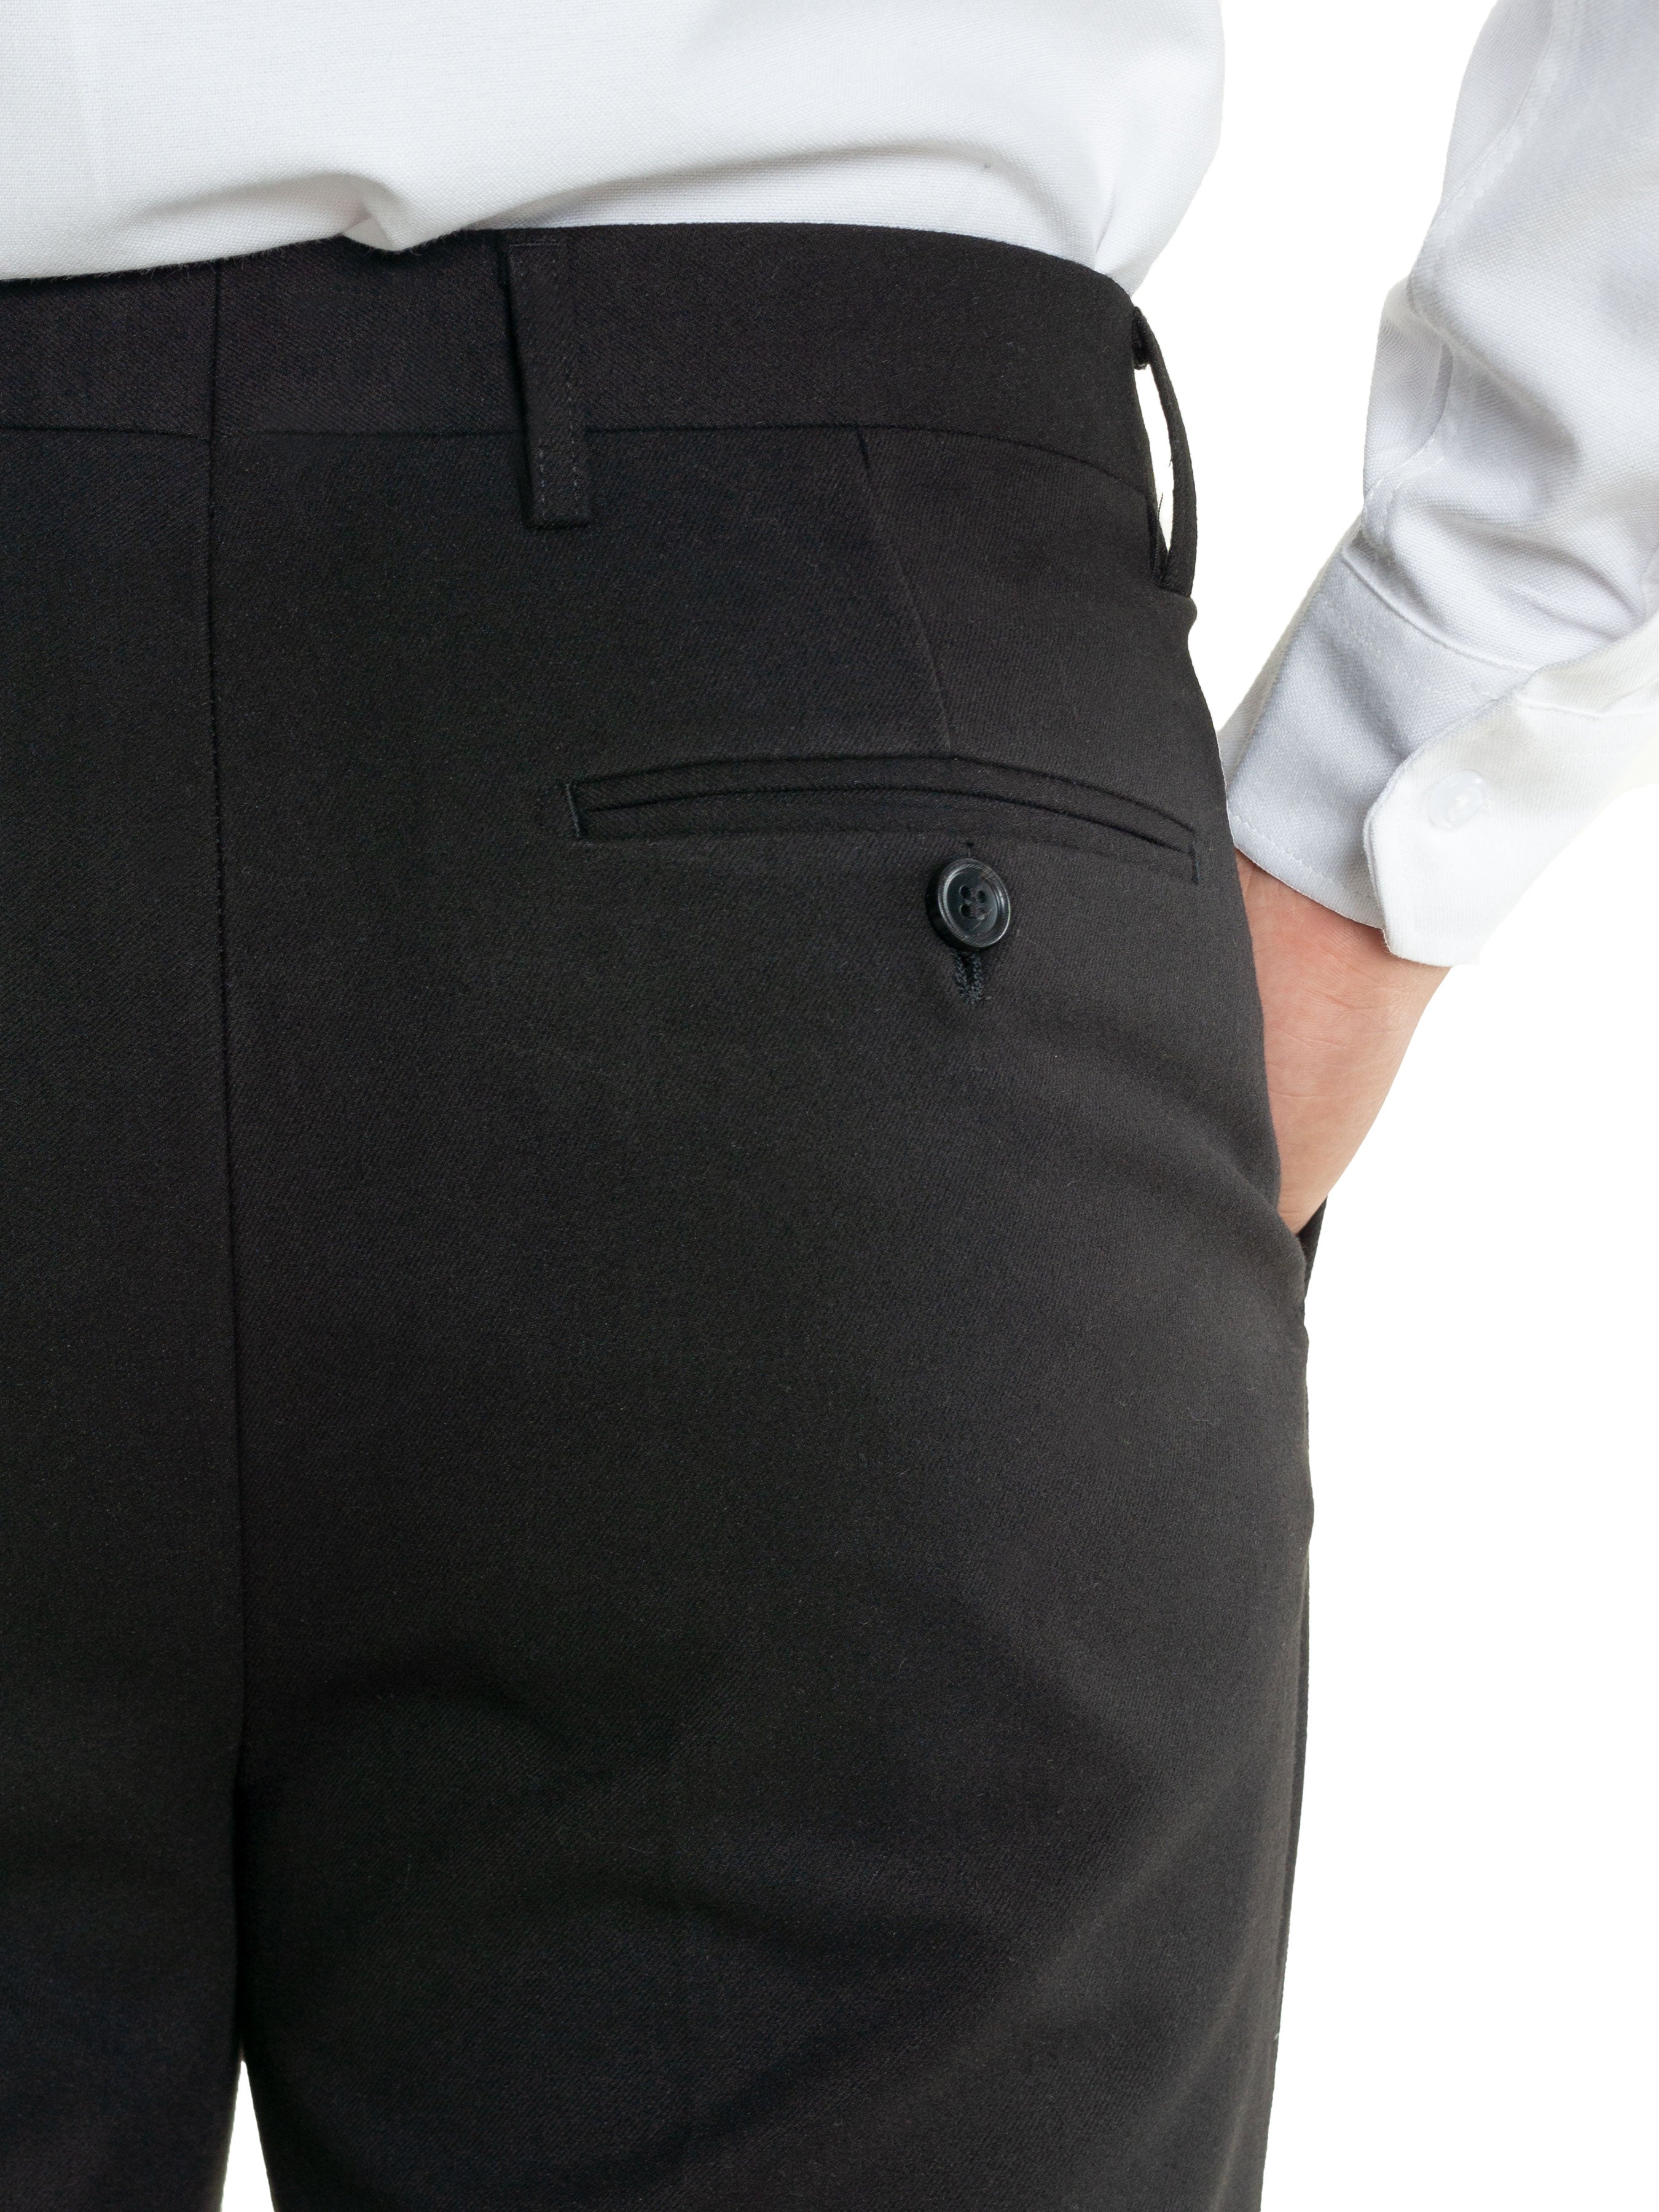 Trousers With Belt Loop -  Black Charcoal Plain (Stretchable) - Zeve Shoes